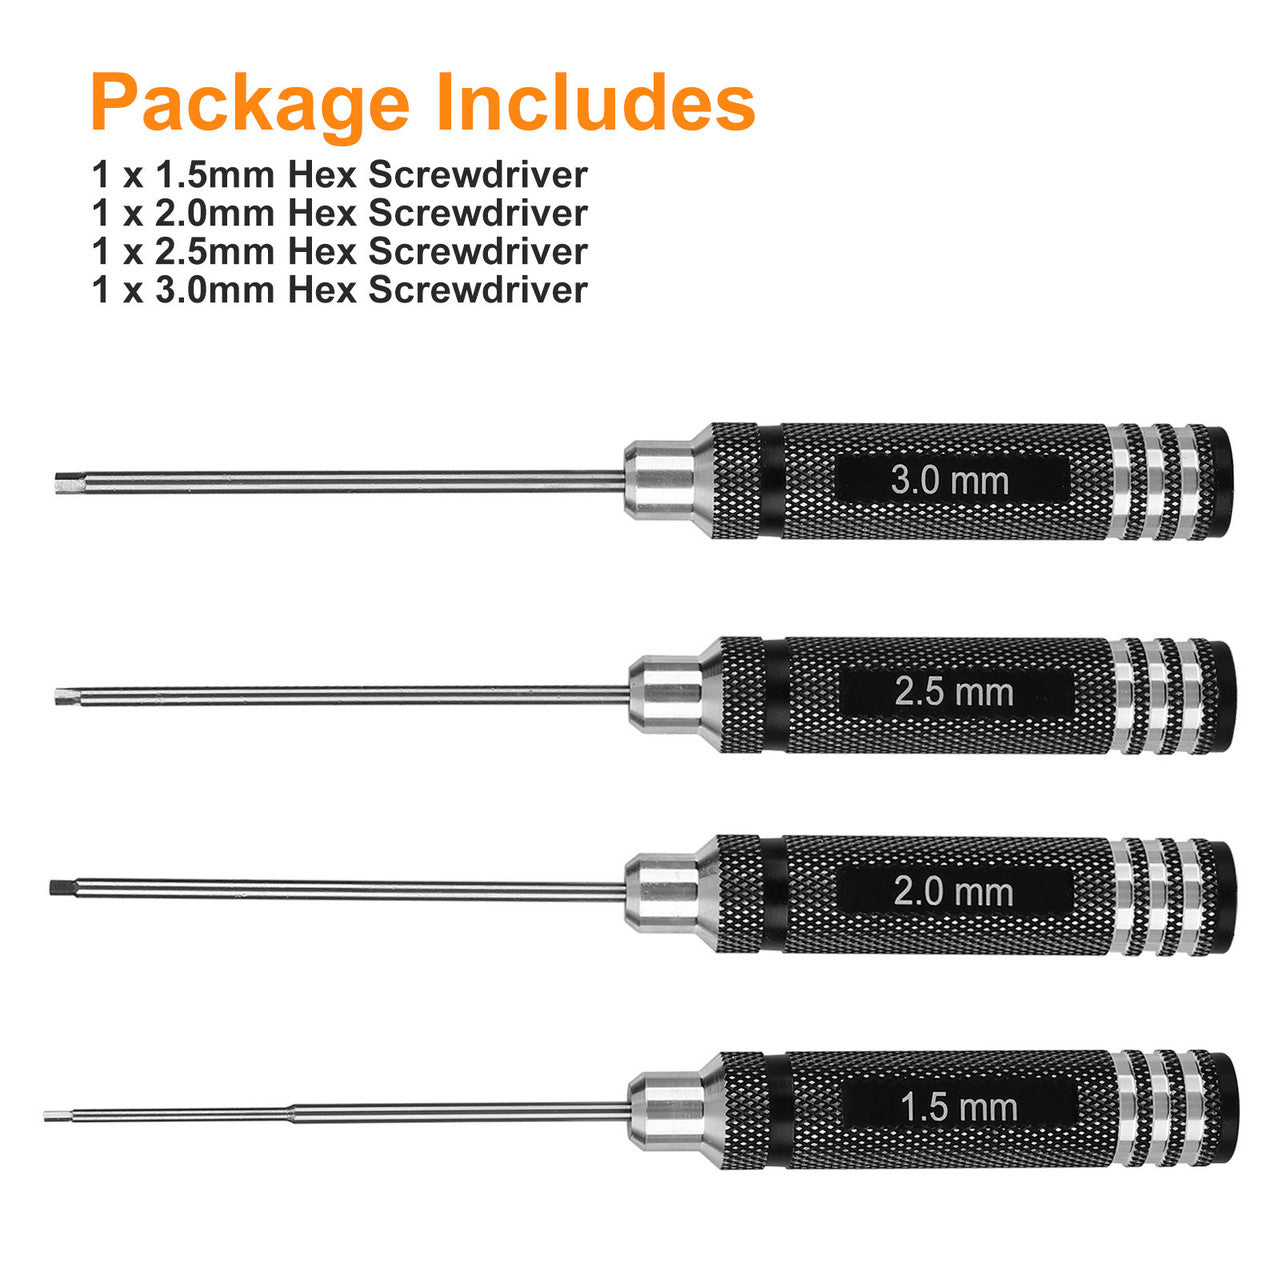 4pcs Hex Screwdriver 1.5 2.0 2.5 3.0mm RC Car Boat Helicopter Hex Screw Driver - RC Model Screwdriver Tool Kits